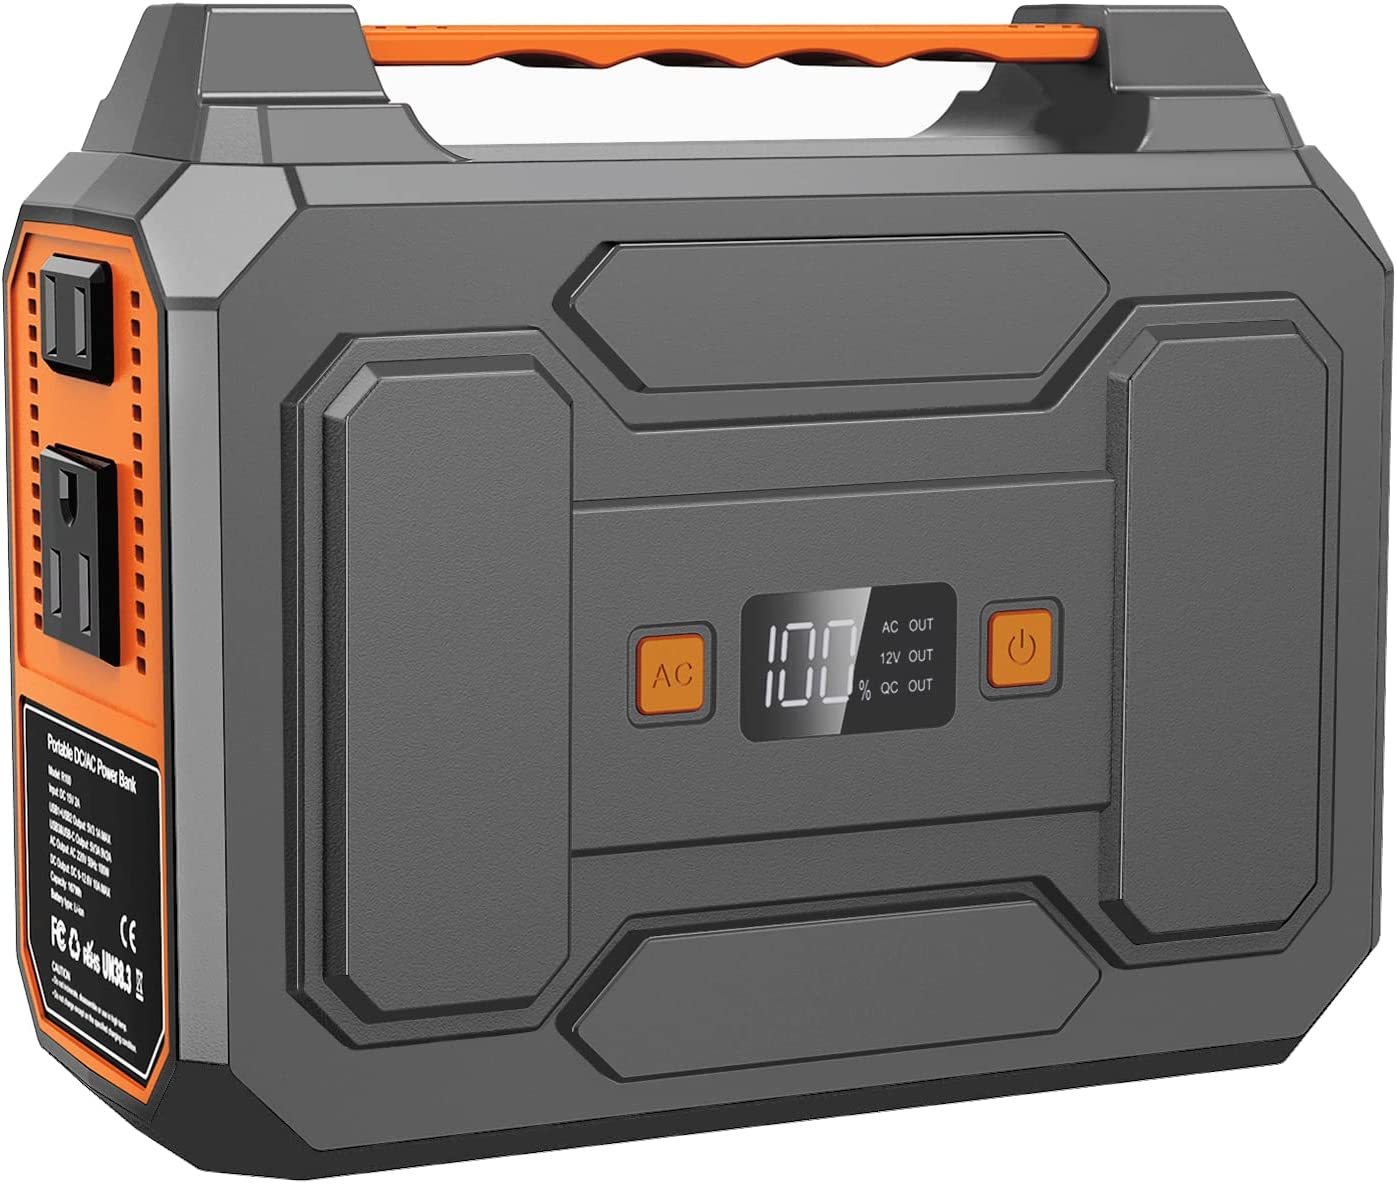 Portable Power Station 100W, Portable Laptop Charger 146Wh/39600mAh,Backup - $133.99